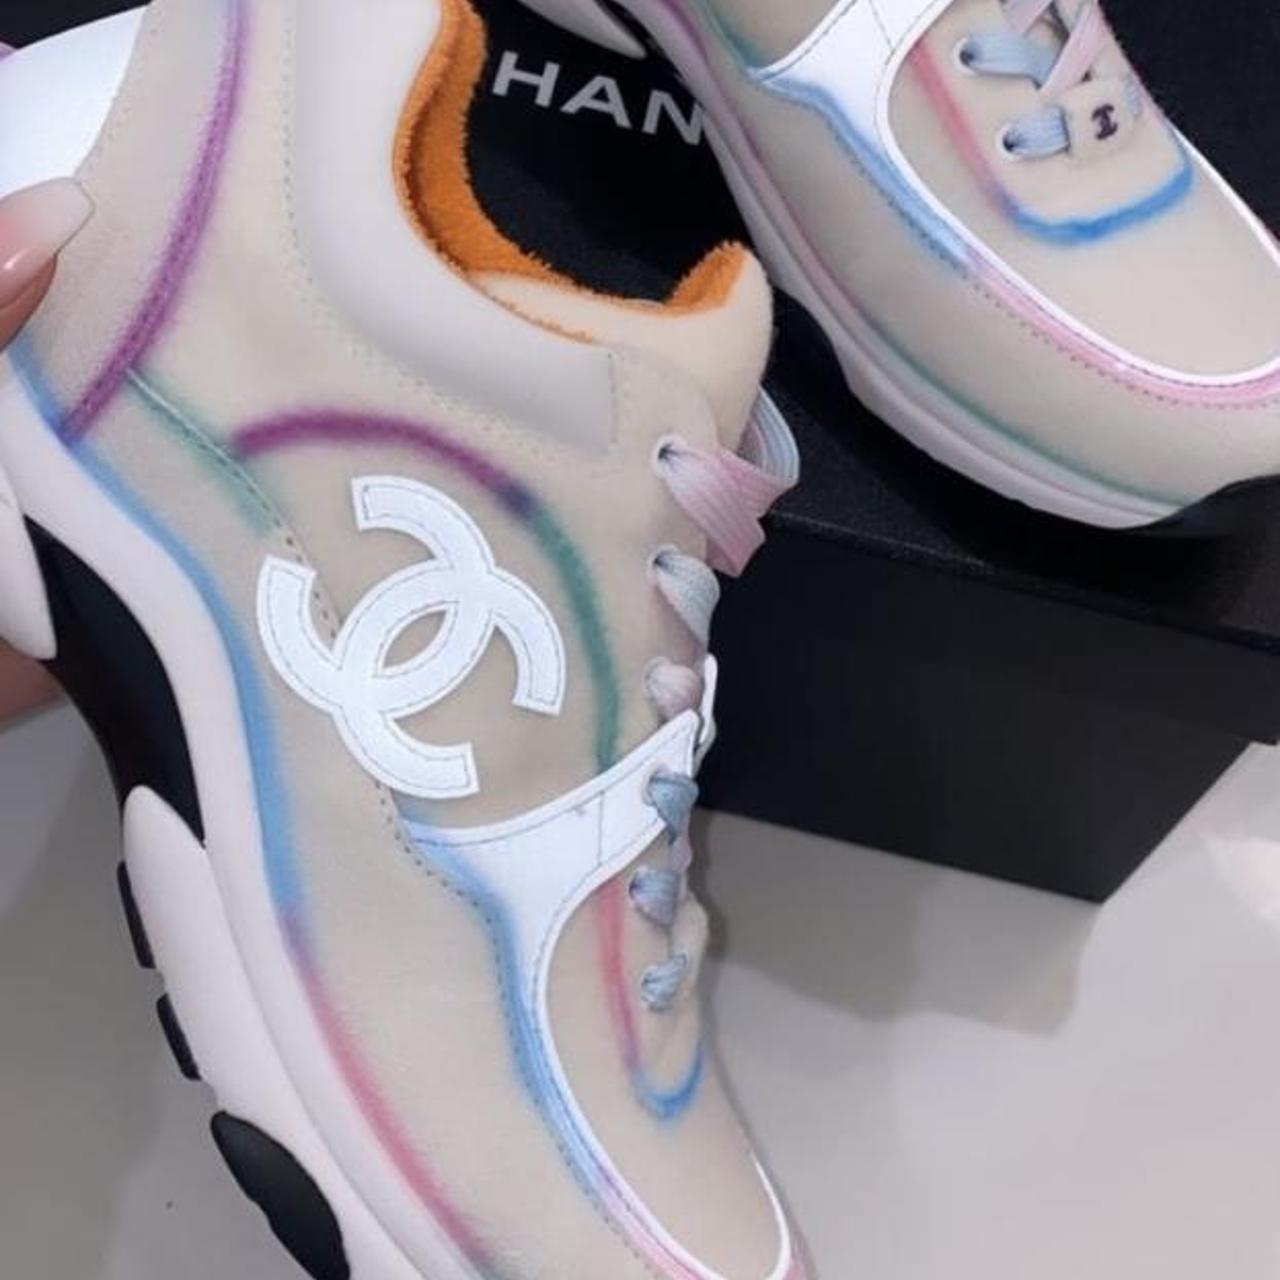 Chanel 20b multicolor sneakers!, bought wrong size